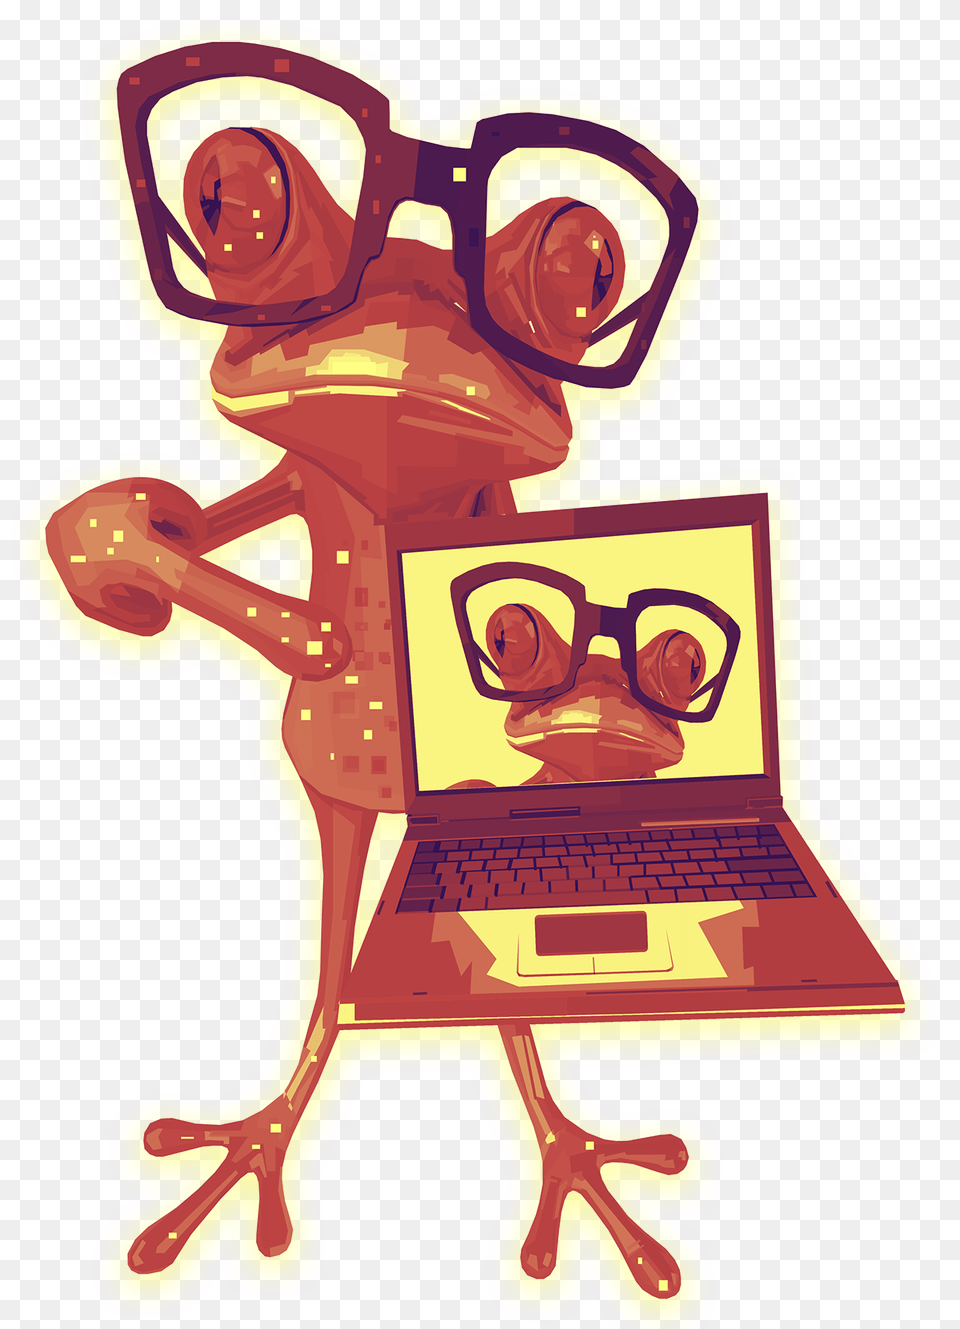 Crazy Frog Poster Design On Student Show, Electronics, Laptop, Computer, Pc Free Png